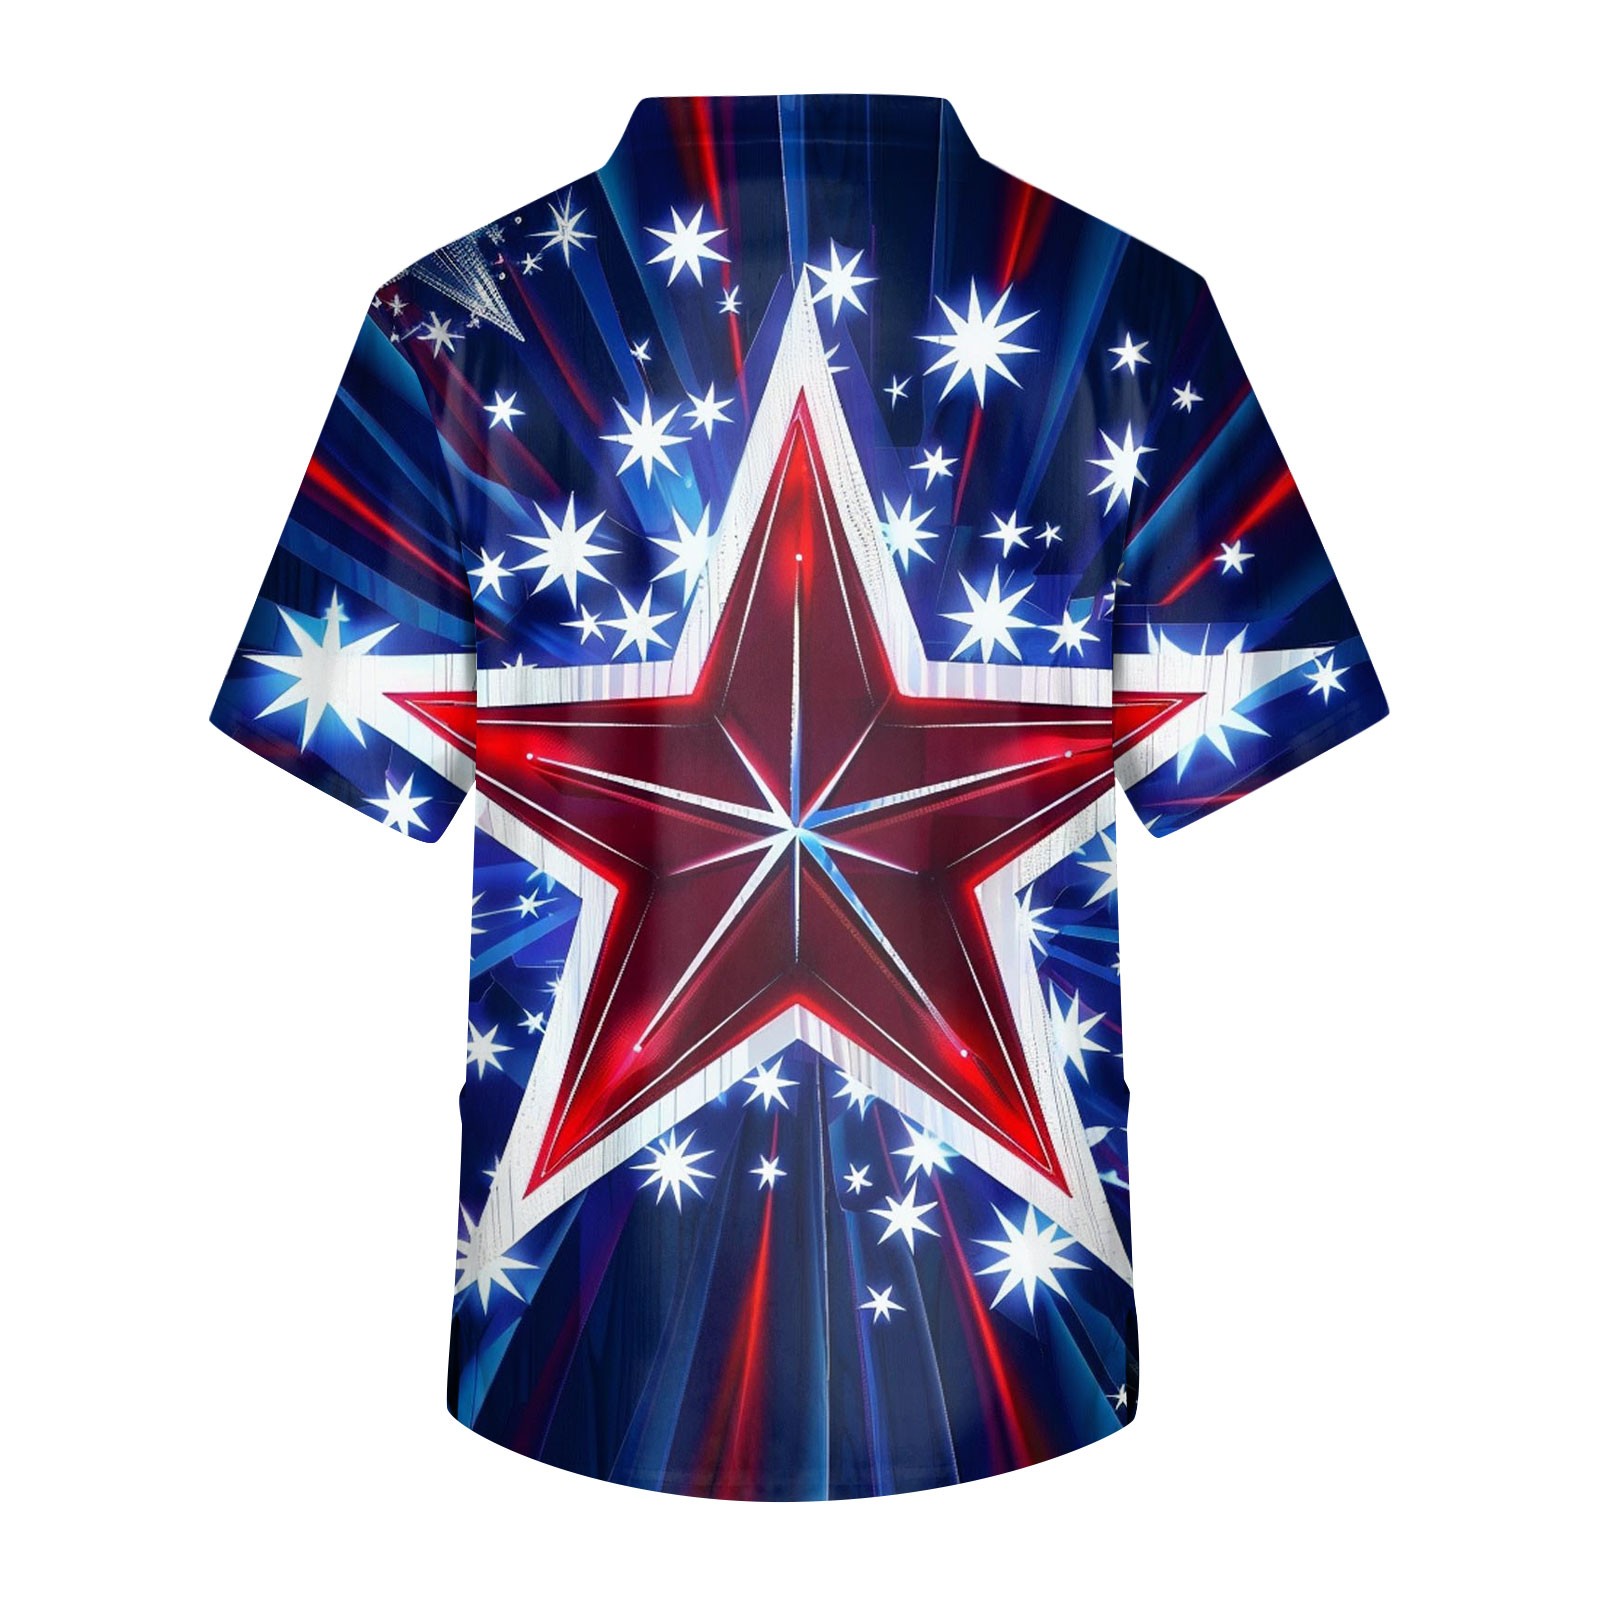 DENGDENG 4th of July Shirts for Men Short Sleeve Independence Day USA ...